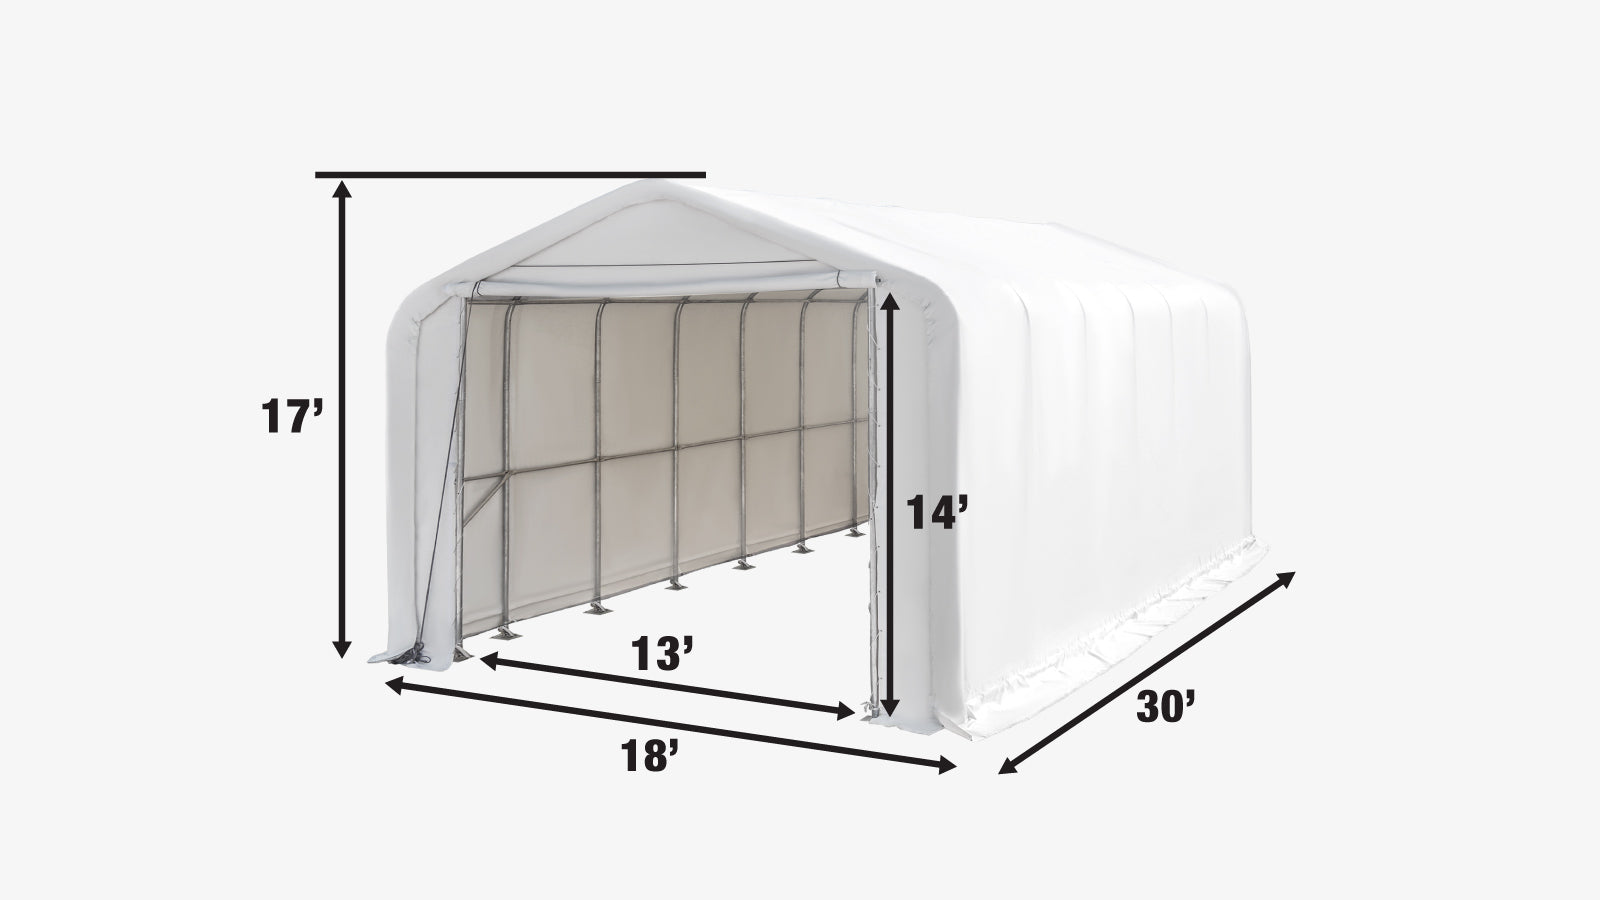 TMG Industrial 18’ x 30’ RV/Motorhome Storage Shelter, 17 oz PVC Fabric Cover, Front Roll-Up Door, Enclosed Rear Wall, 3-Layer Galvanized Steel Frame, 13’ Straight Sidewalls, TMG-ST1830-specifications-image